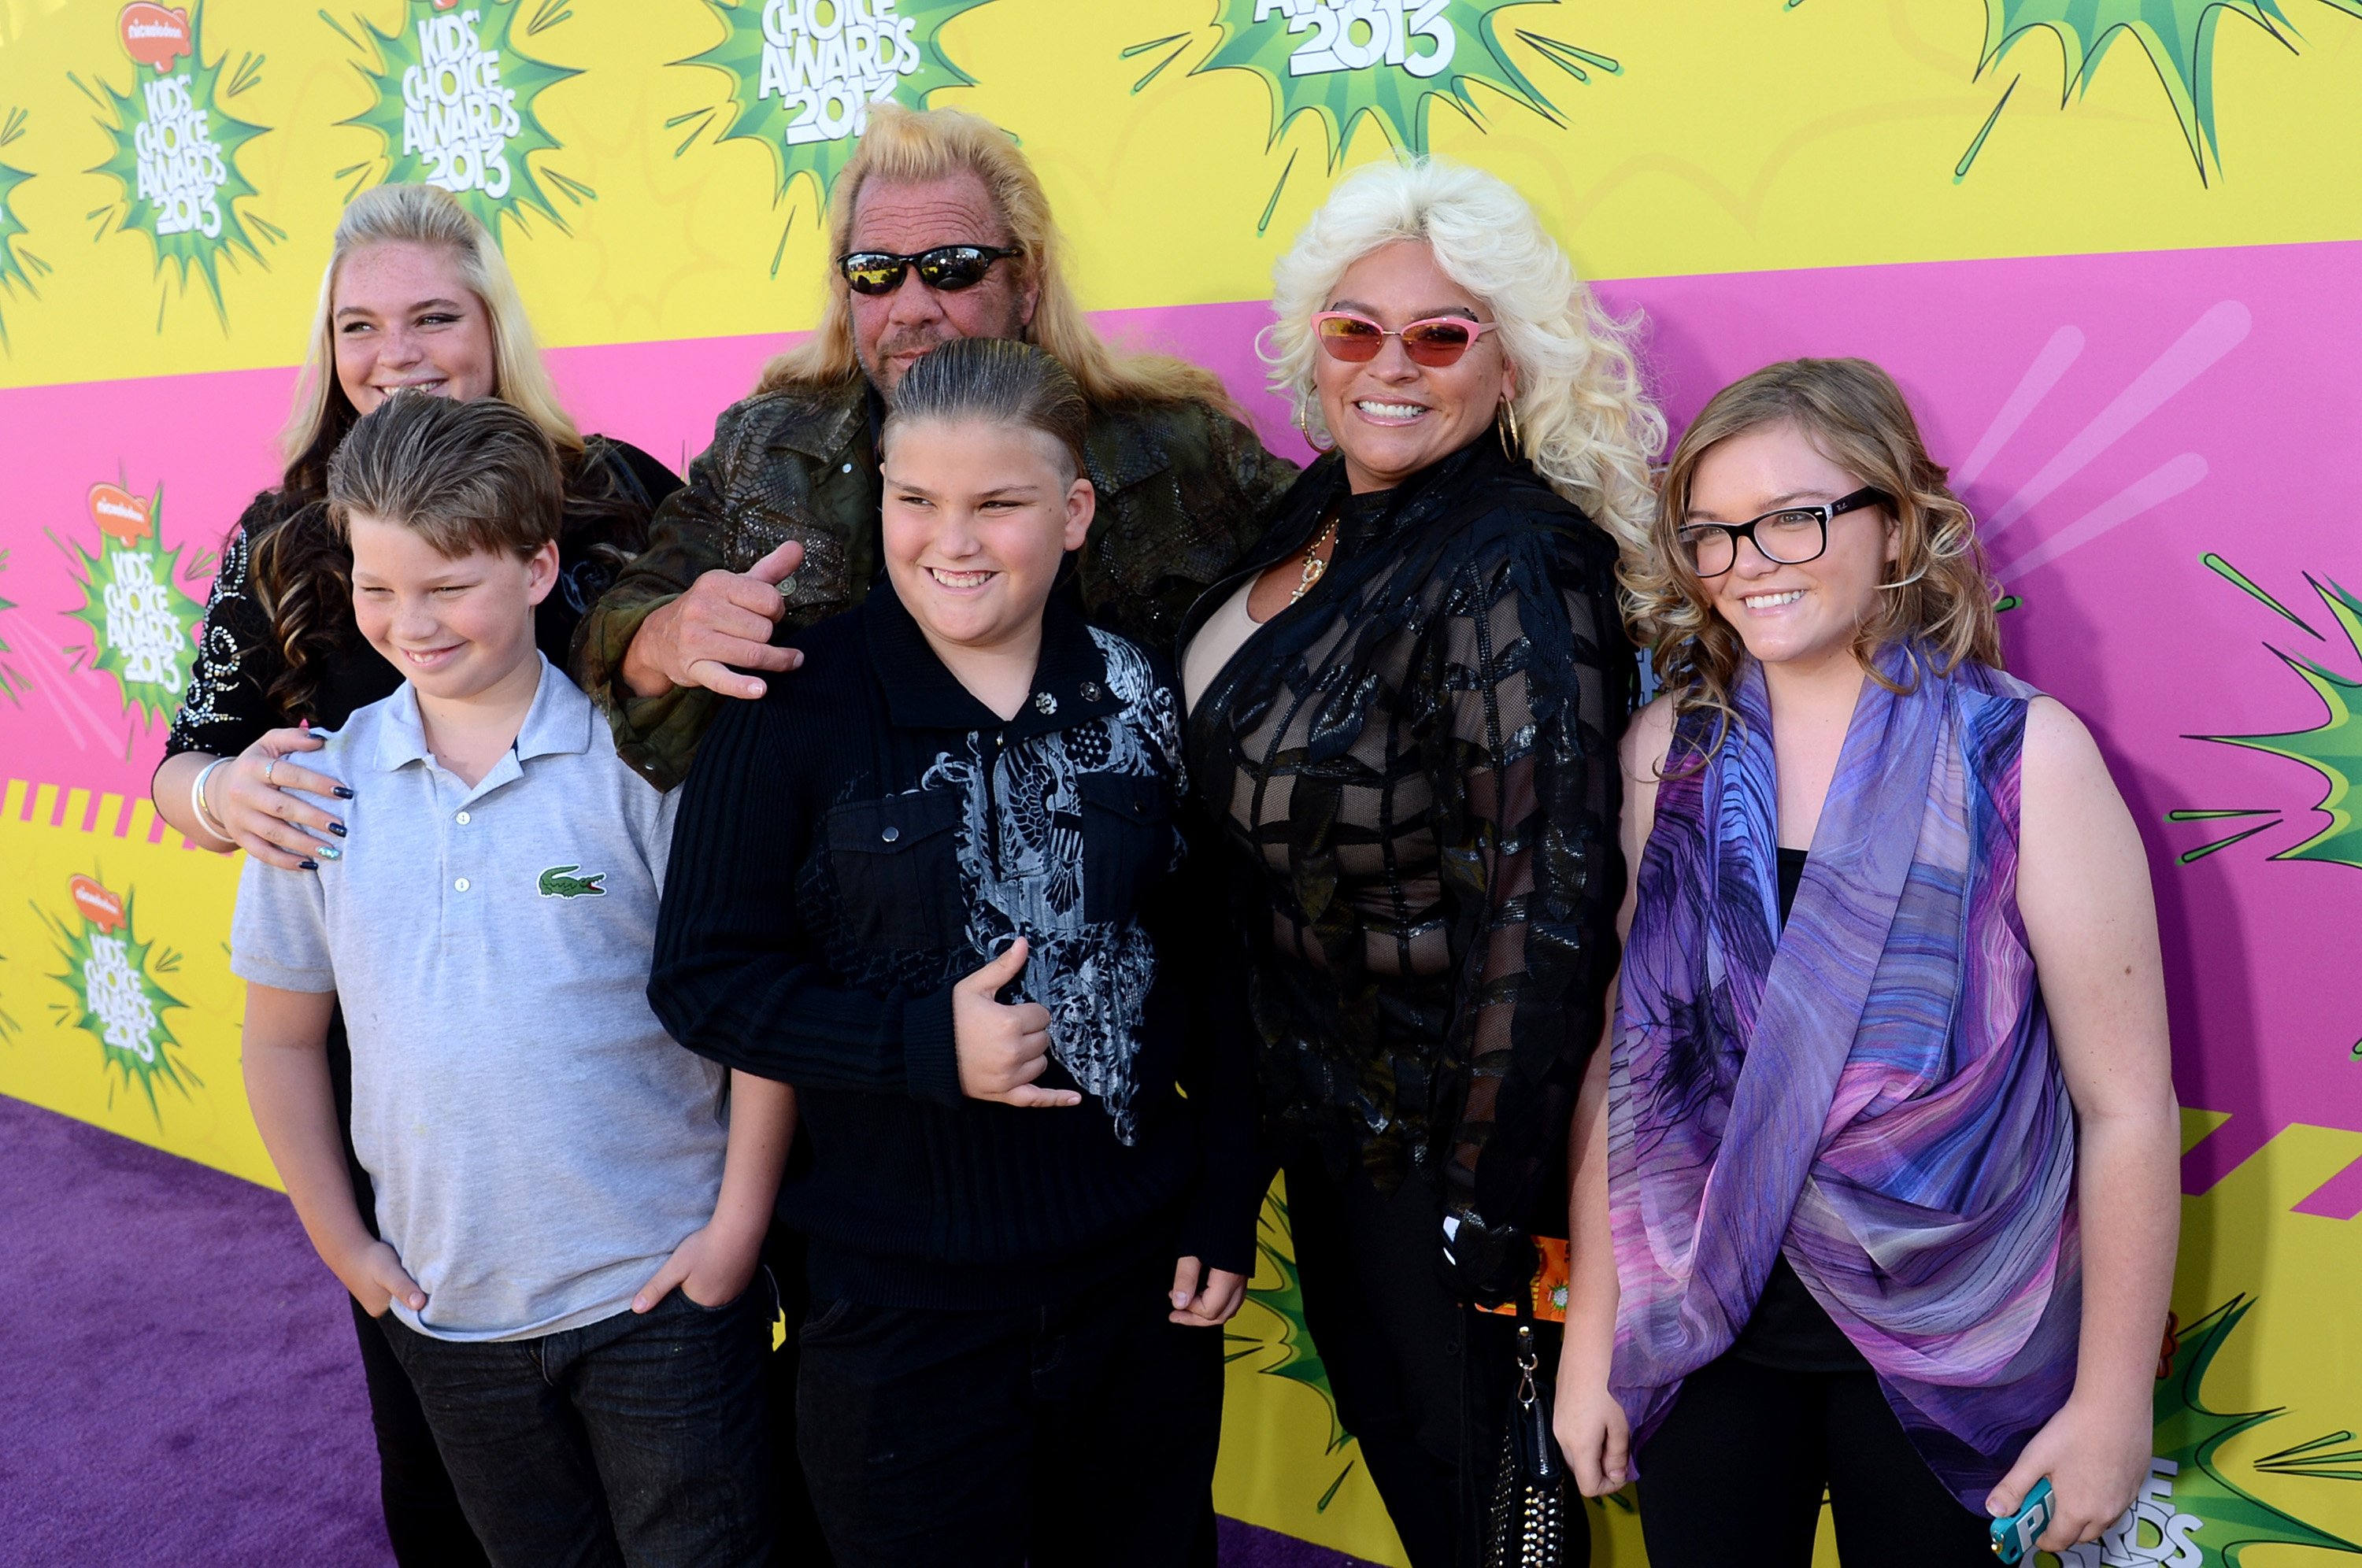 TV personality Duane 'Dog' Chapman (C) and family arrive Nickelodeon's 26th Annual Kids' Choice Awards at USC Galen Center on March 23, 2013 in Los Angeles, California | Photo: Getty Images